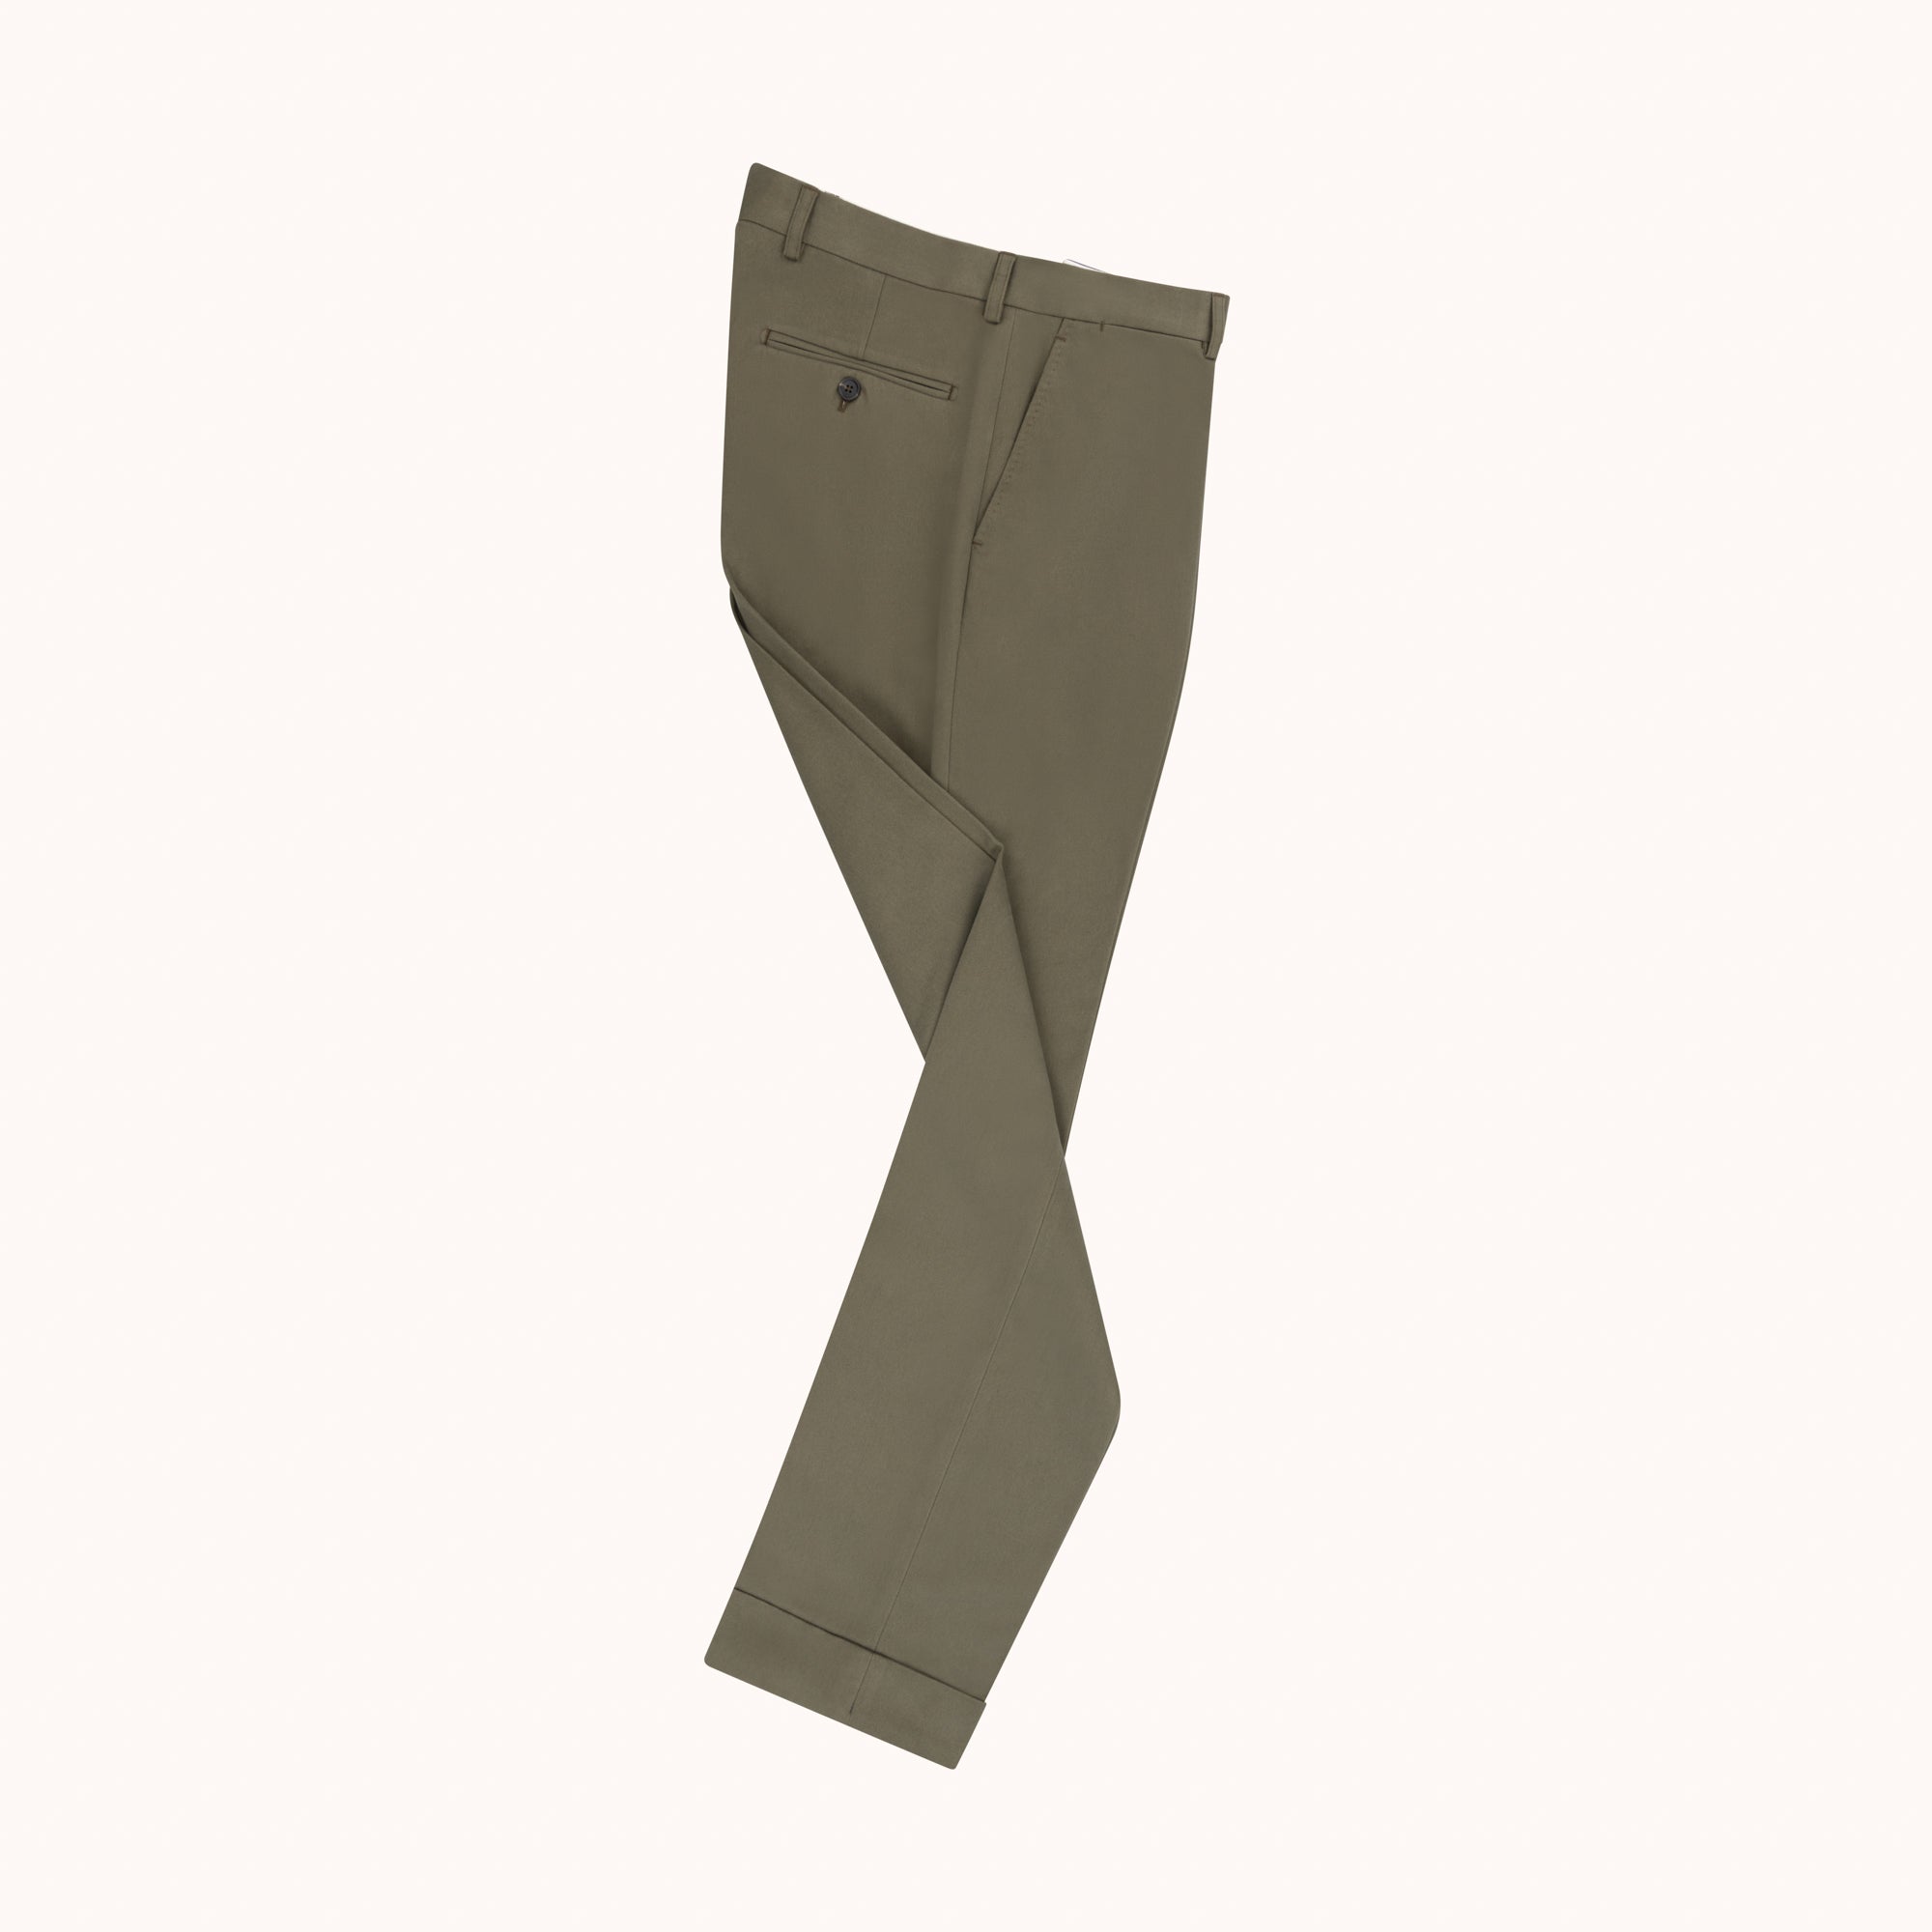 Flat Front Trouser - Olive Brushed Cotton